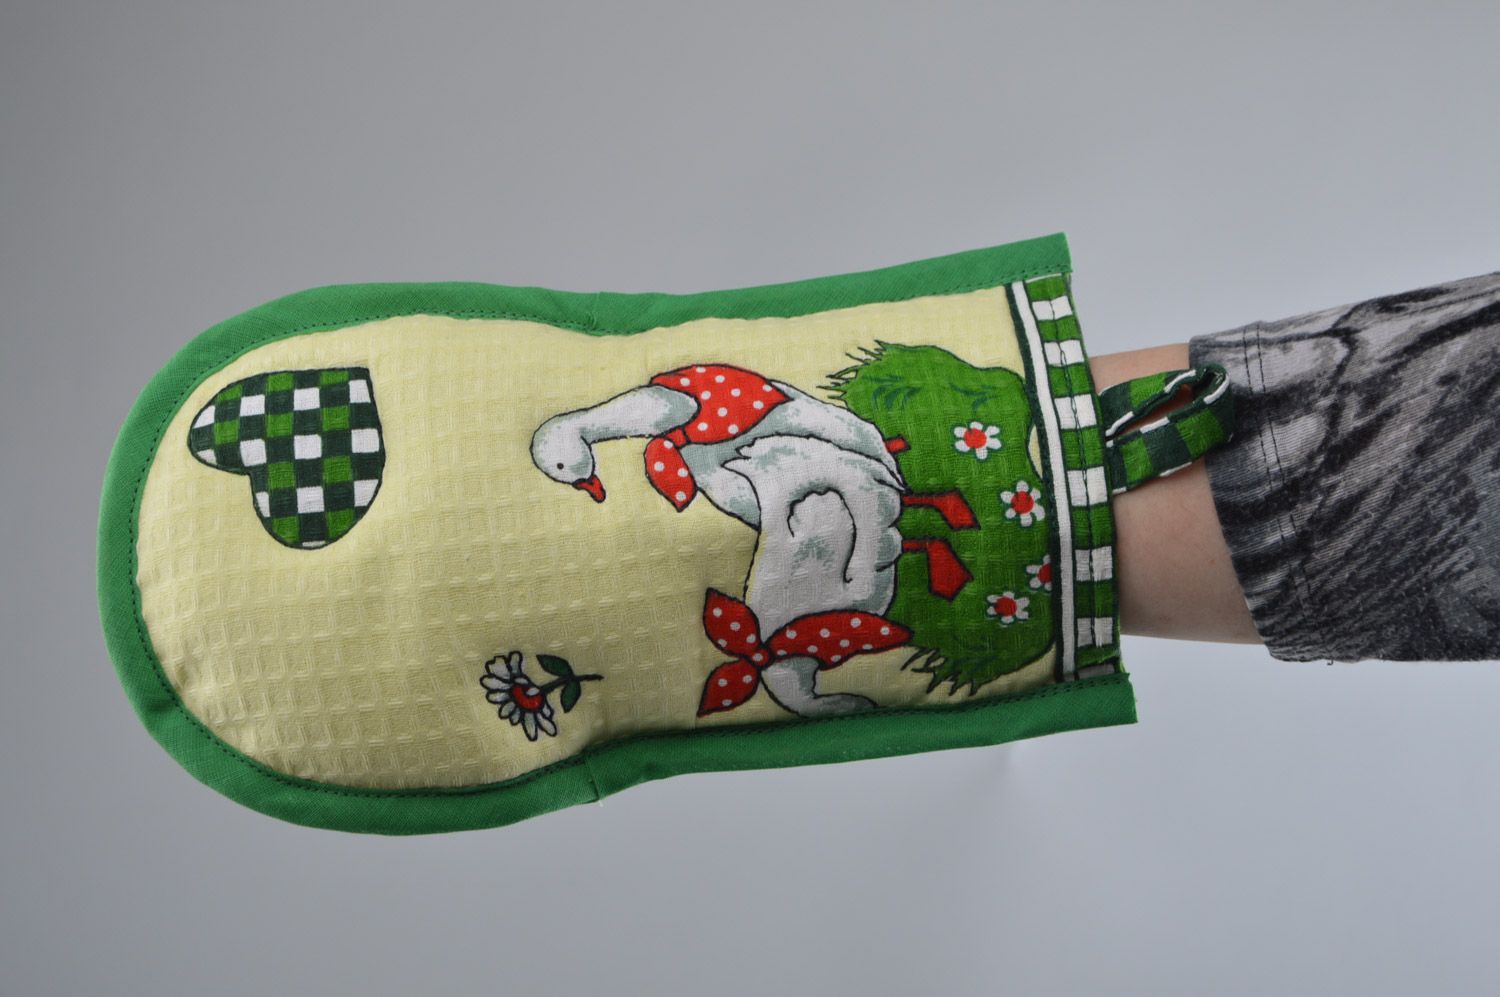 Cute handmade oven mitten sewn of colorful cotton fabric with geese image   photo 2